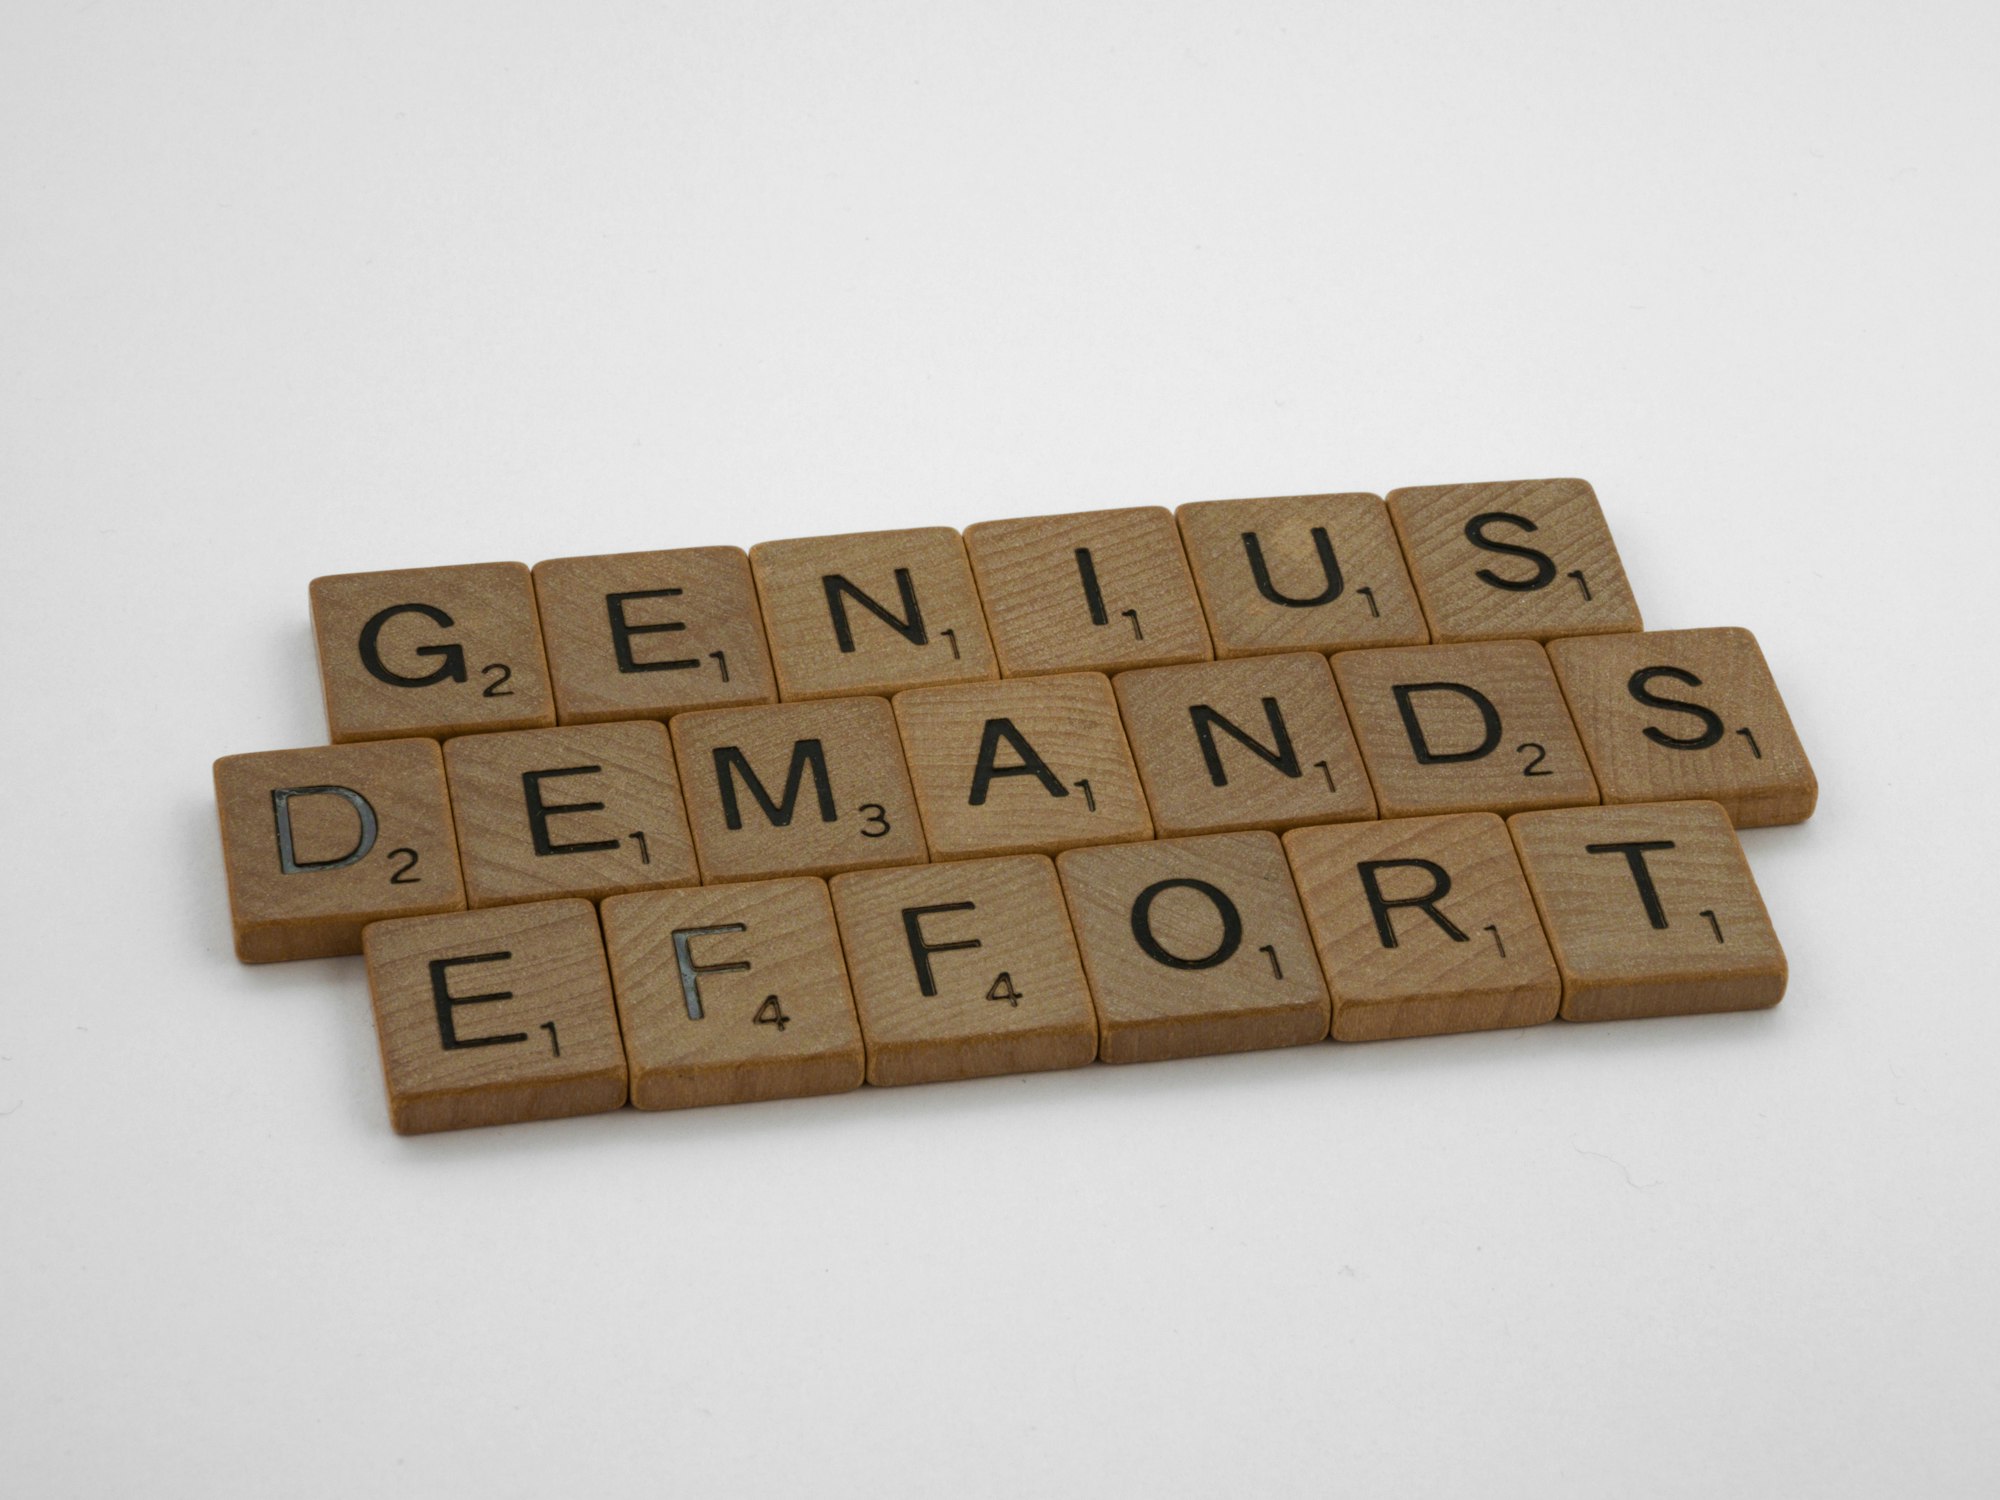 scrabble, scrabble pieces, lettering, letters, wood, scrabble tiles, white background, words, quote, letters, type, typography, design, layout, focus, bokeh, blur, photography, images, image, genius demands effort, genius, effort, work, work hard, practise, practice, learn, 10,000 hours, success, failure, lazy, laziness, procrastination, 10, 000 hours, ten thousand hours, anders ericsson, malcolm gladwell, outlier, one day at a time, journey, keep going, never give up,